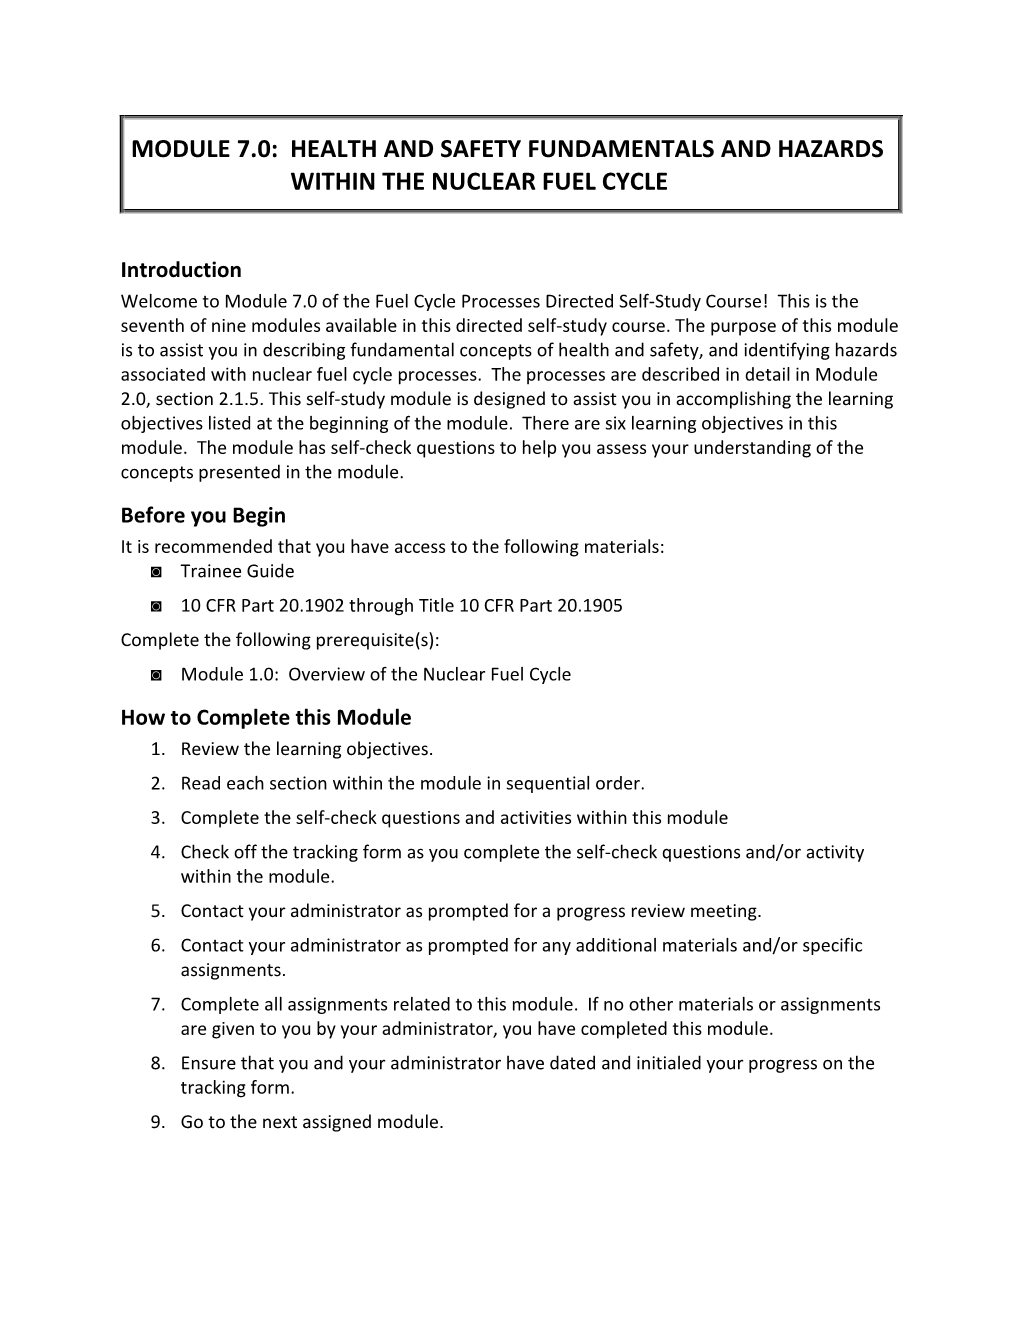 Health and Safety Fundamentals and Hazards Within the Nuclear Fuel Cycle